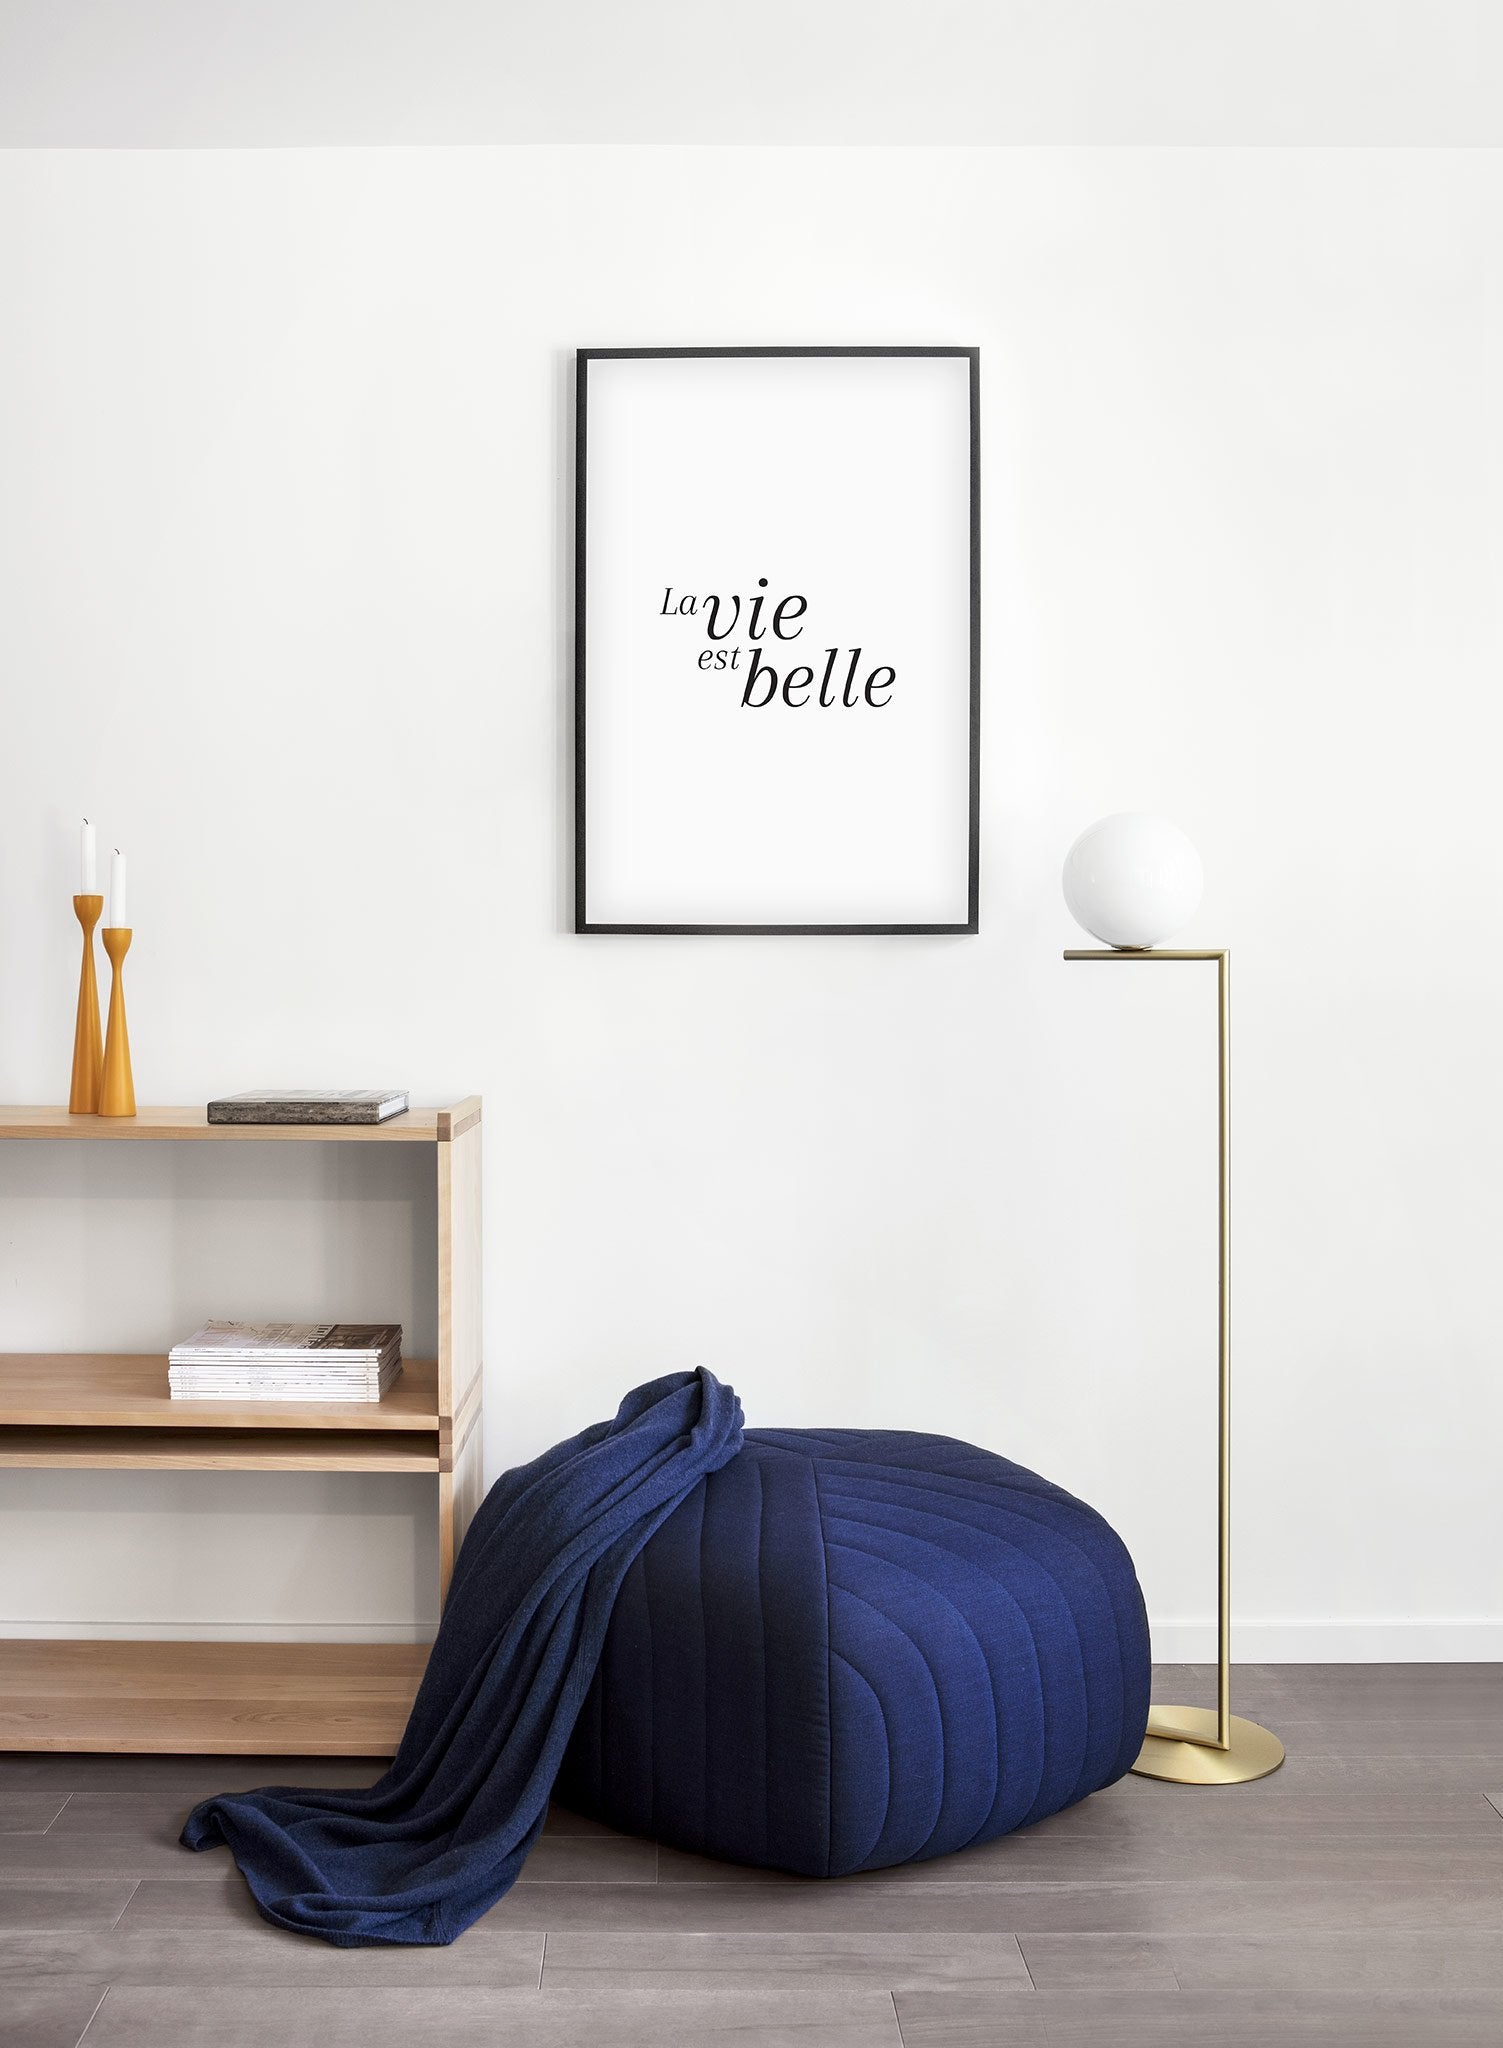 Scandinavian poster by Opposite Wall with black and white graphic typography design of La vie est belle - Entryway